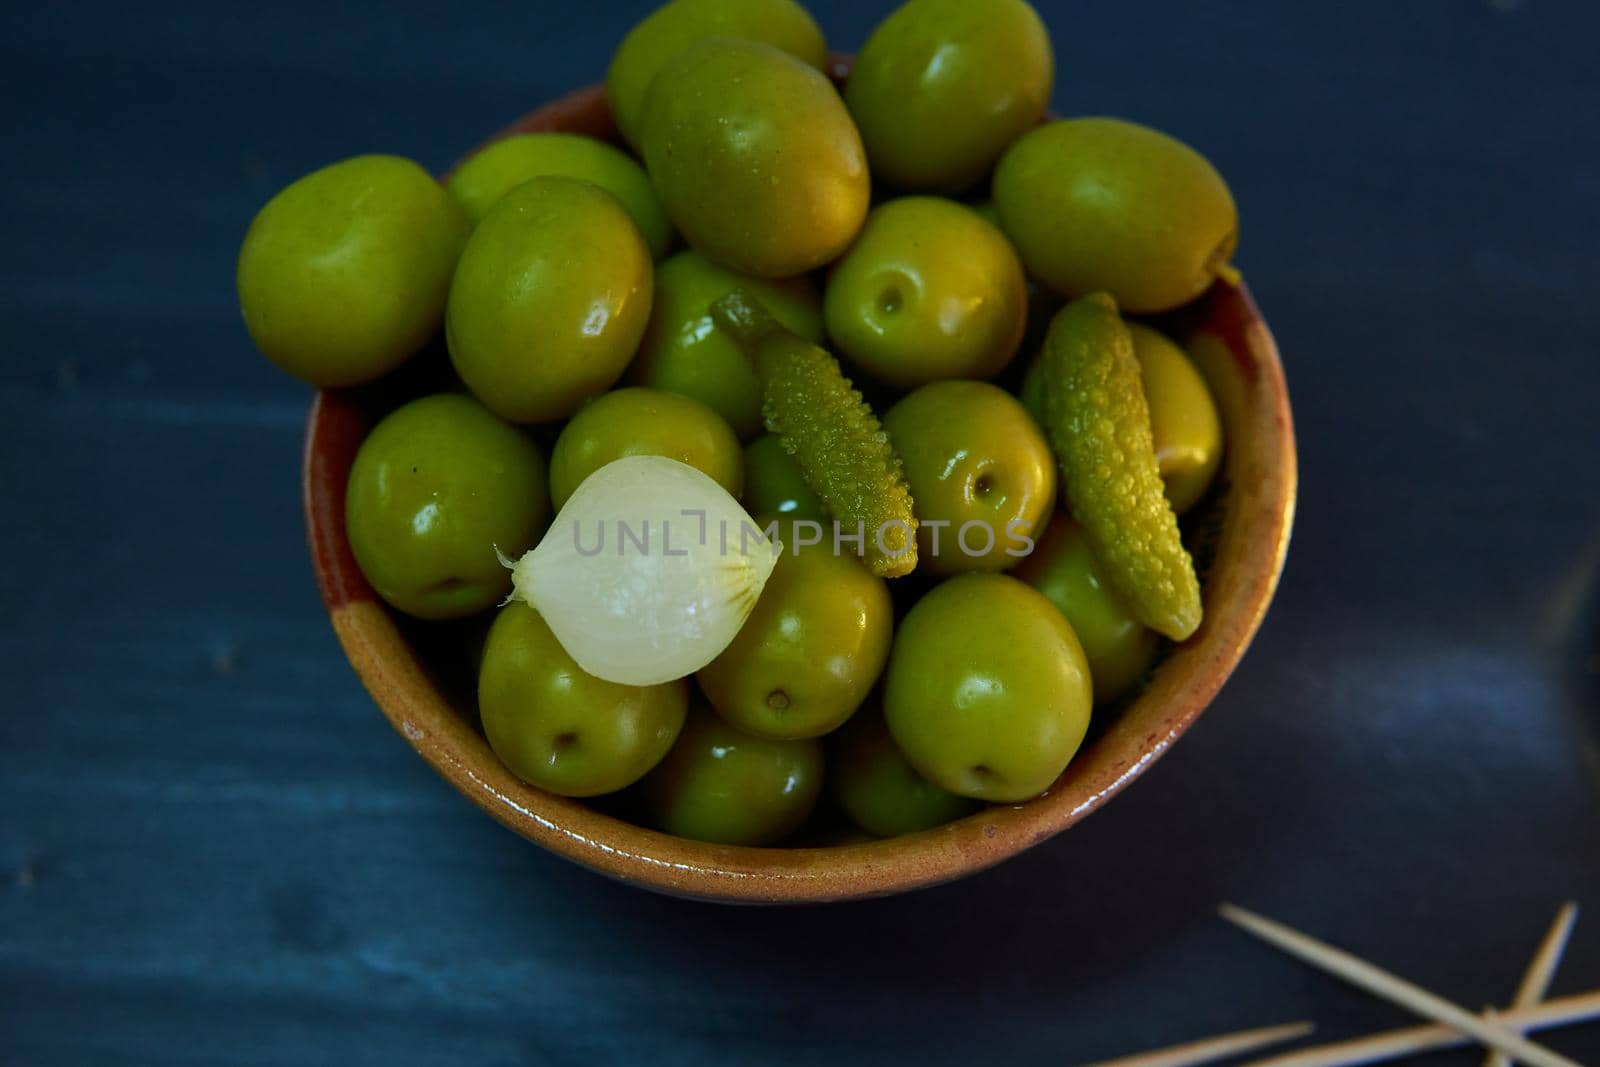 Bowl with green olives with chopsticks on a black background